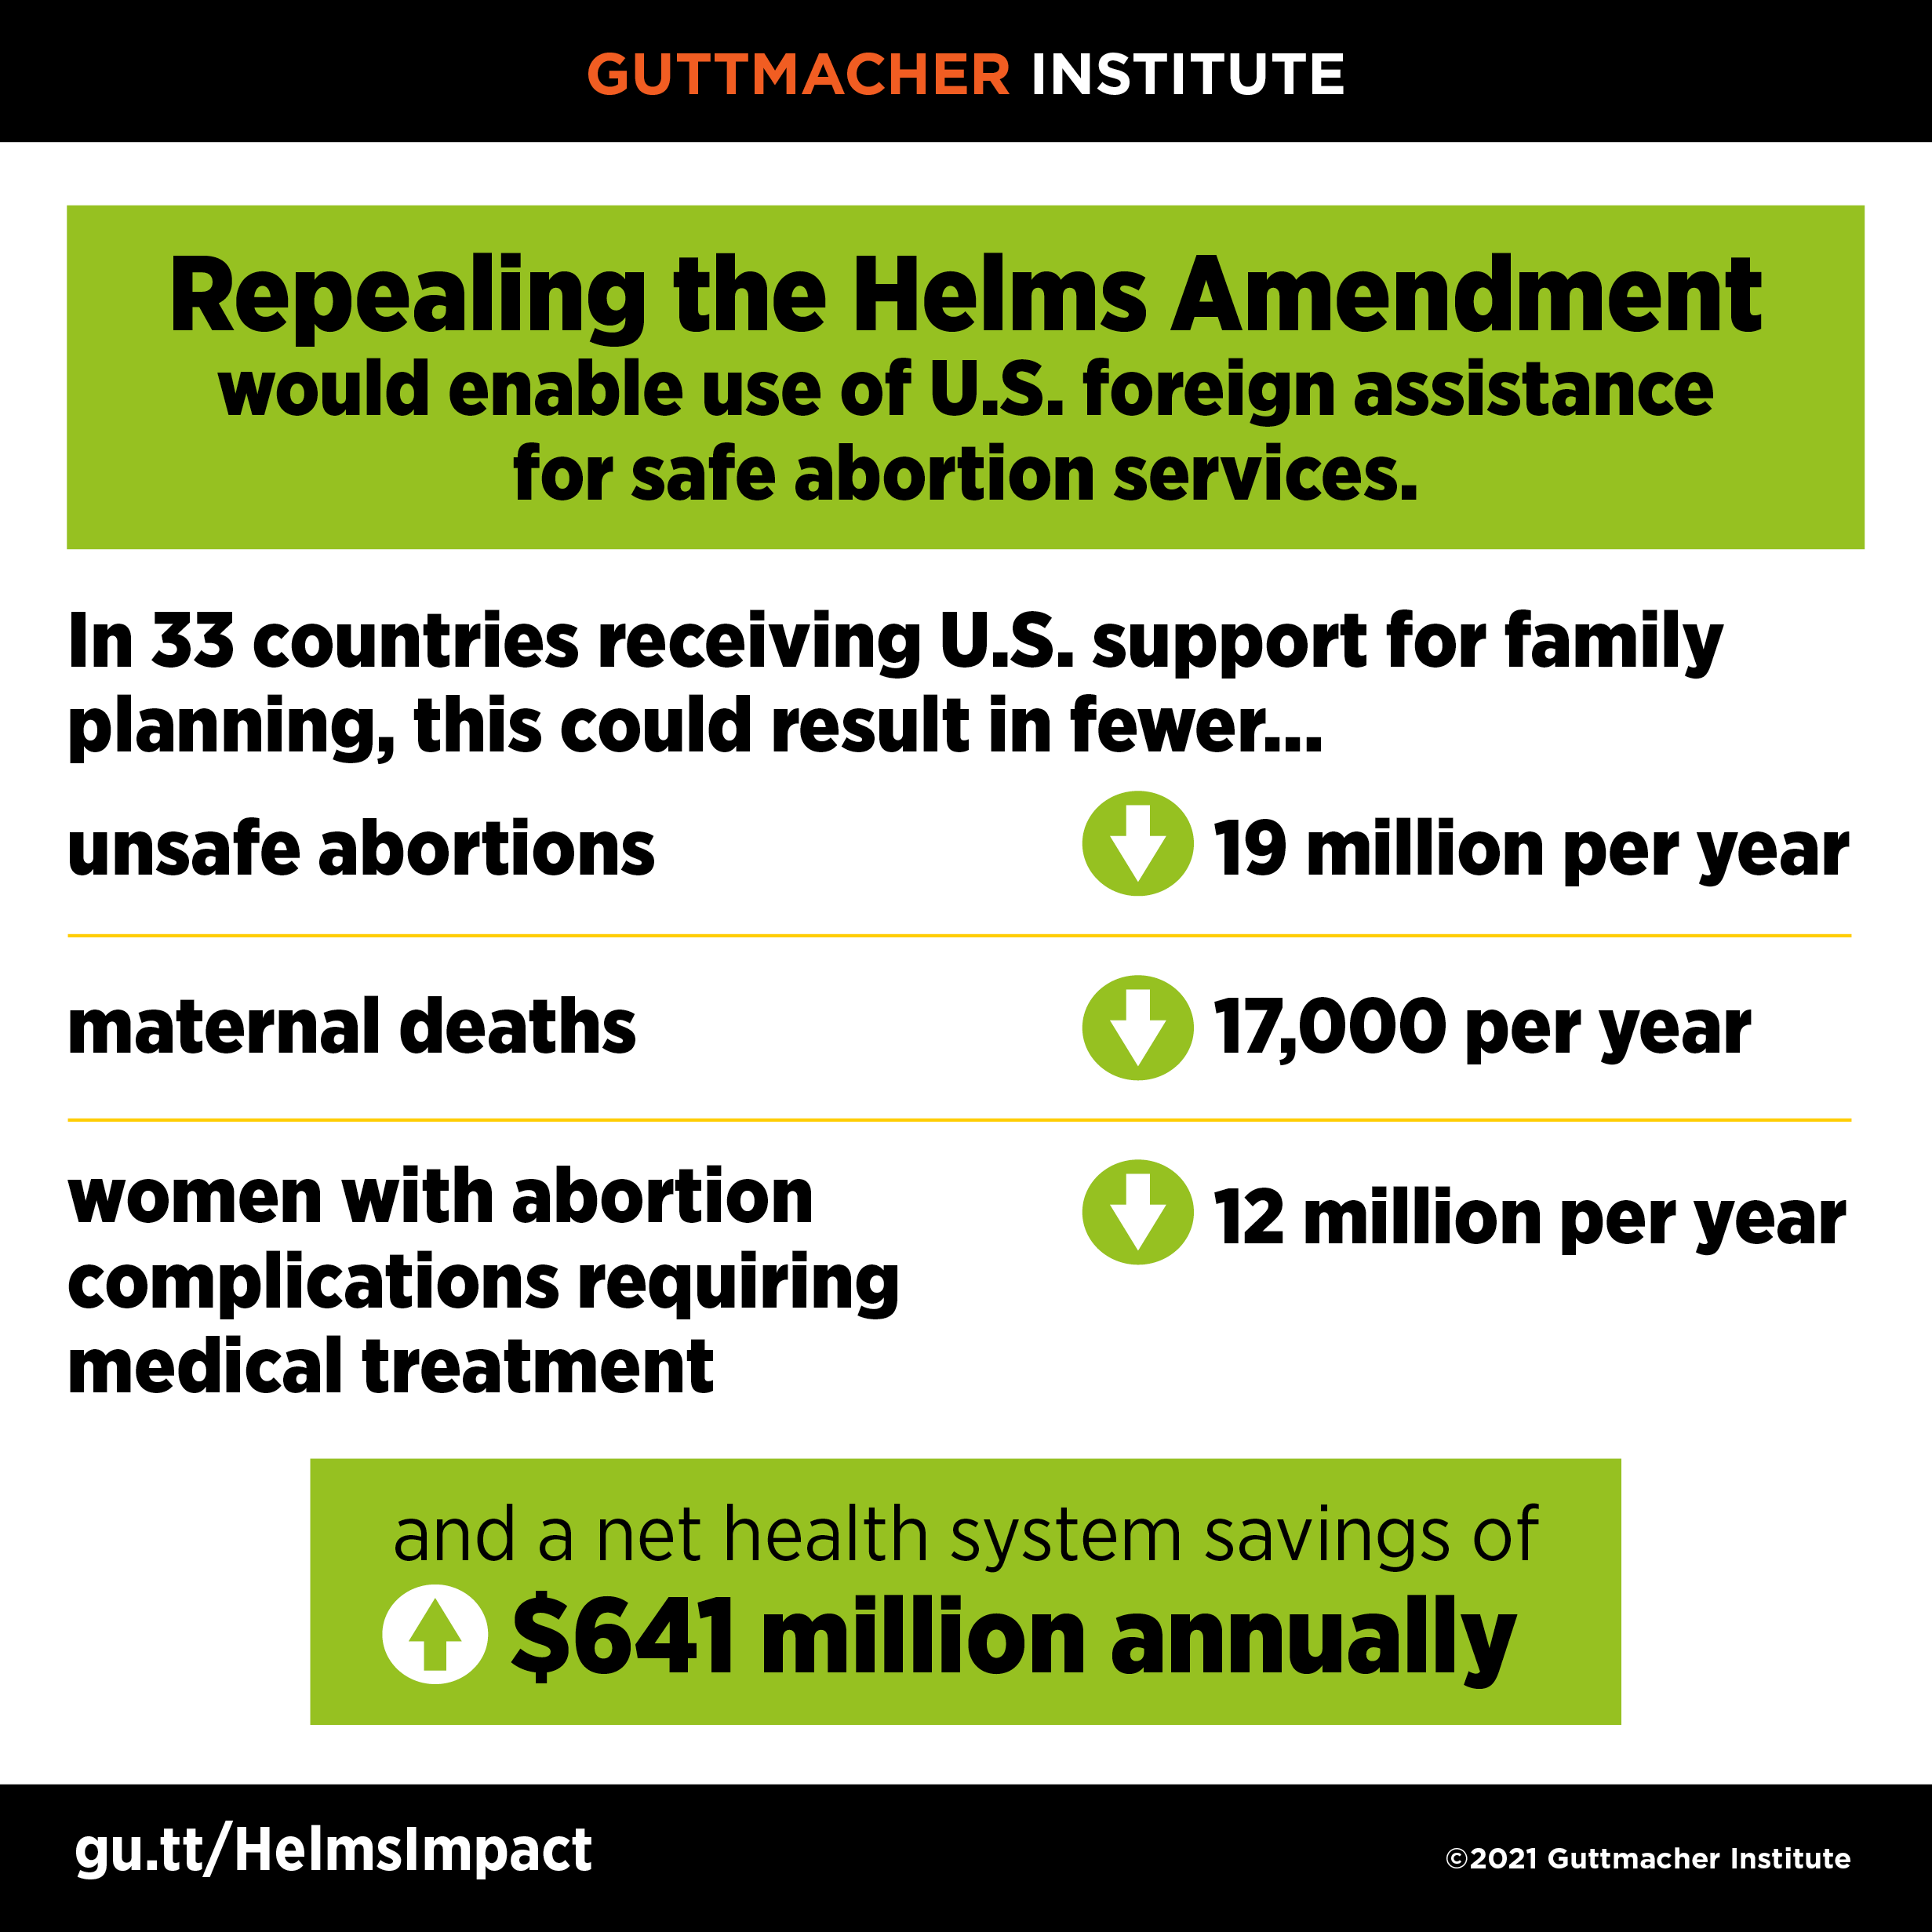 Repealing the Helms Amendment would enable use of U.S. foreign assistance for safe abortion services. In 33 countries receiving U.S. support for family planning, this could result in 19 million fewer unsafe abortions per year, 17,000 fewer maternal deaths per year, 12 million fewer women per year with abortion complications requiring medical treatment and net health system savings of $641 million annually